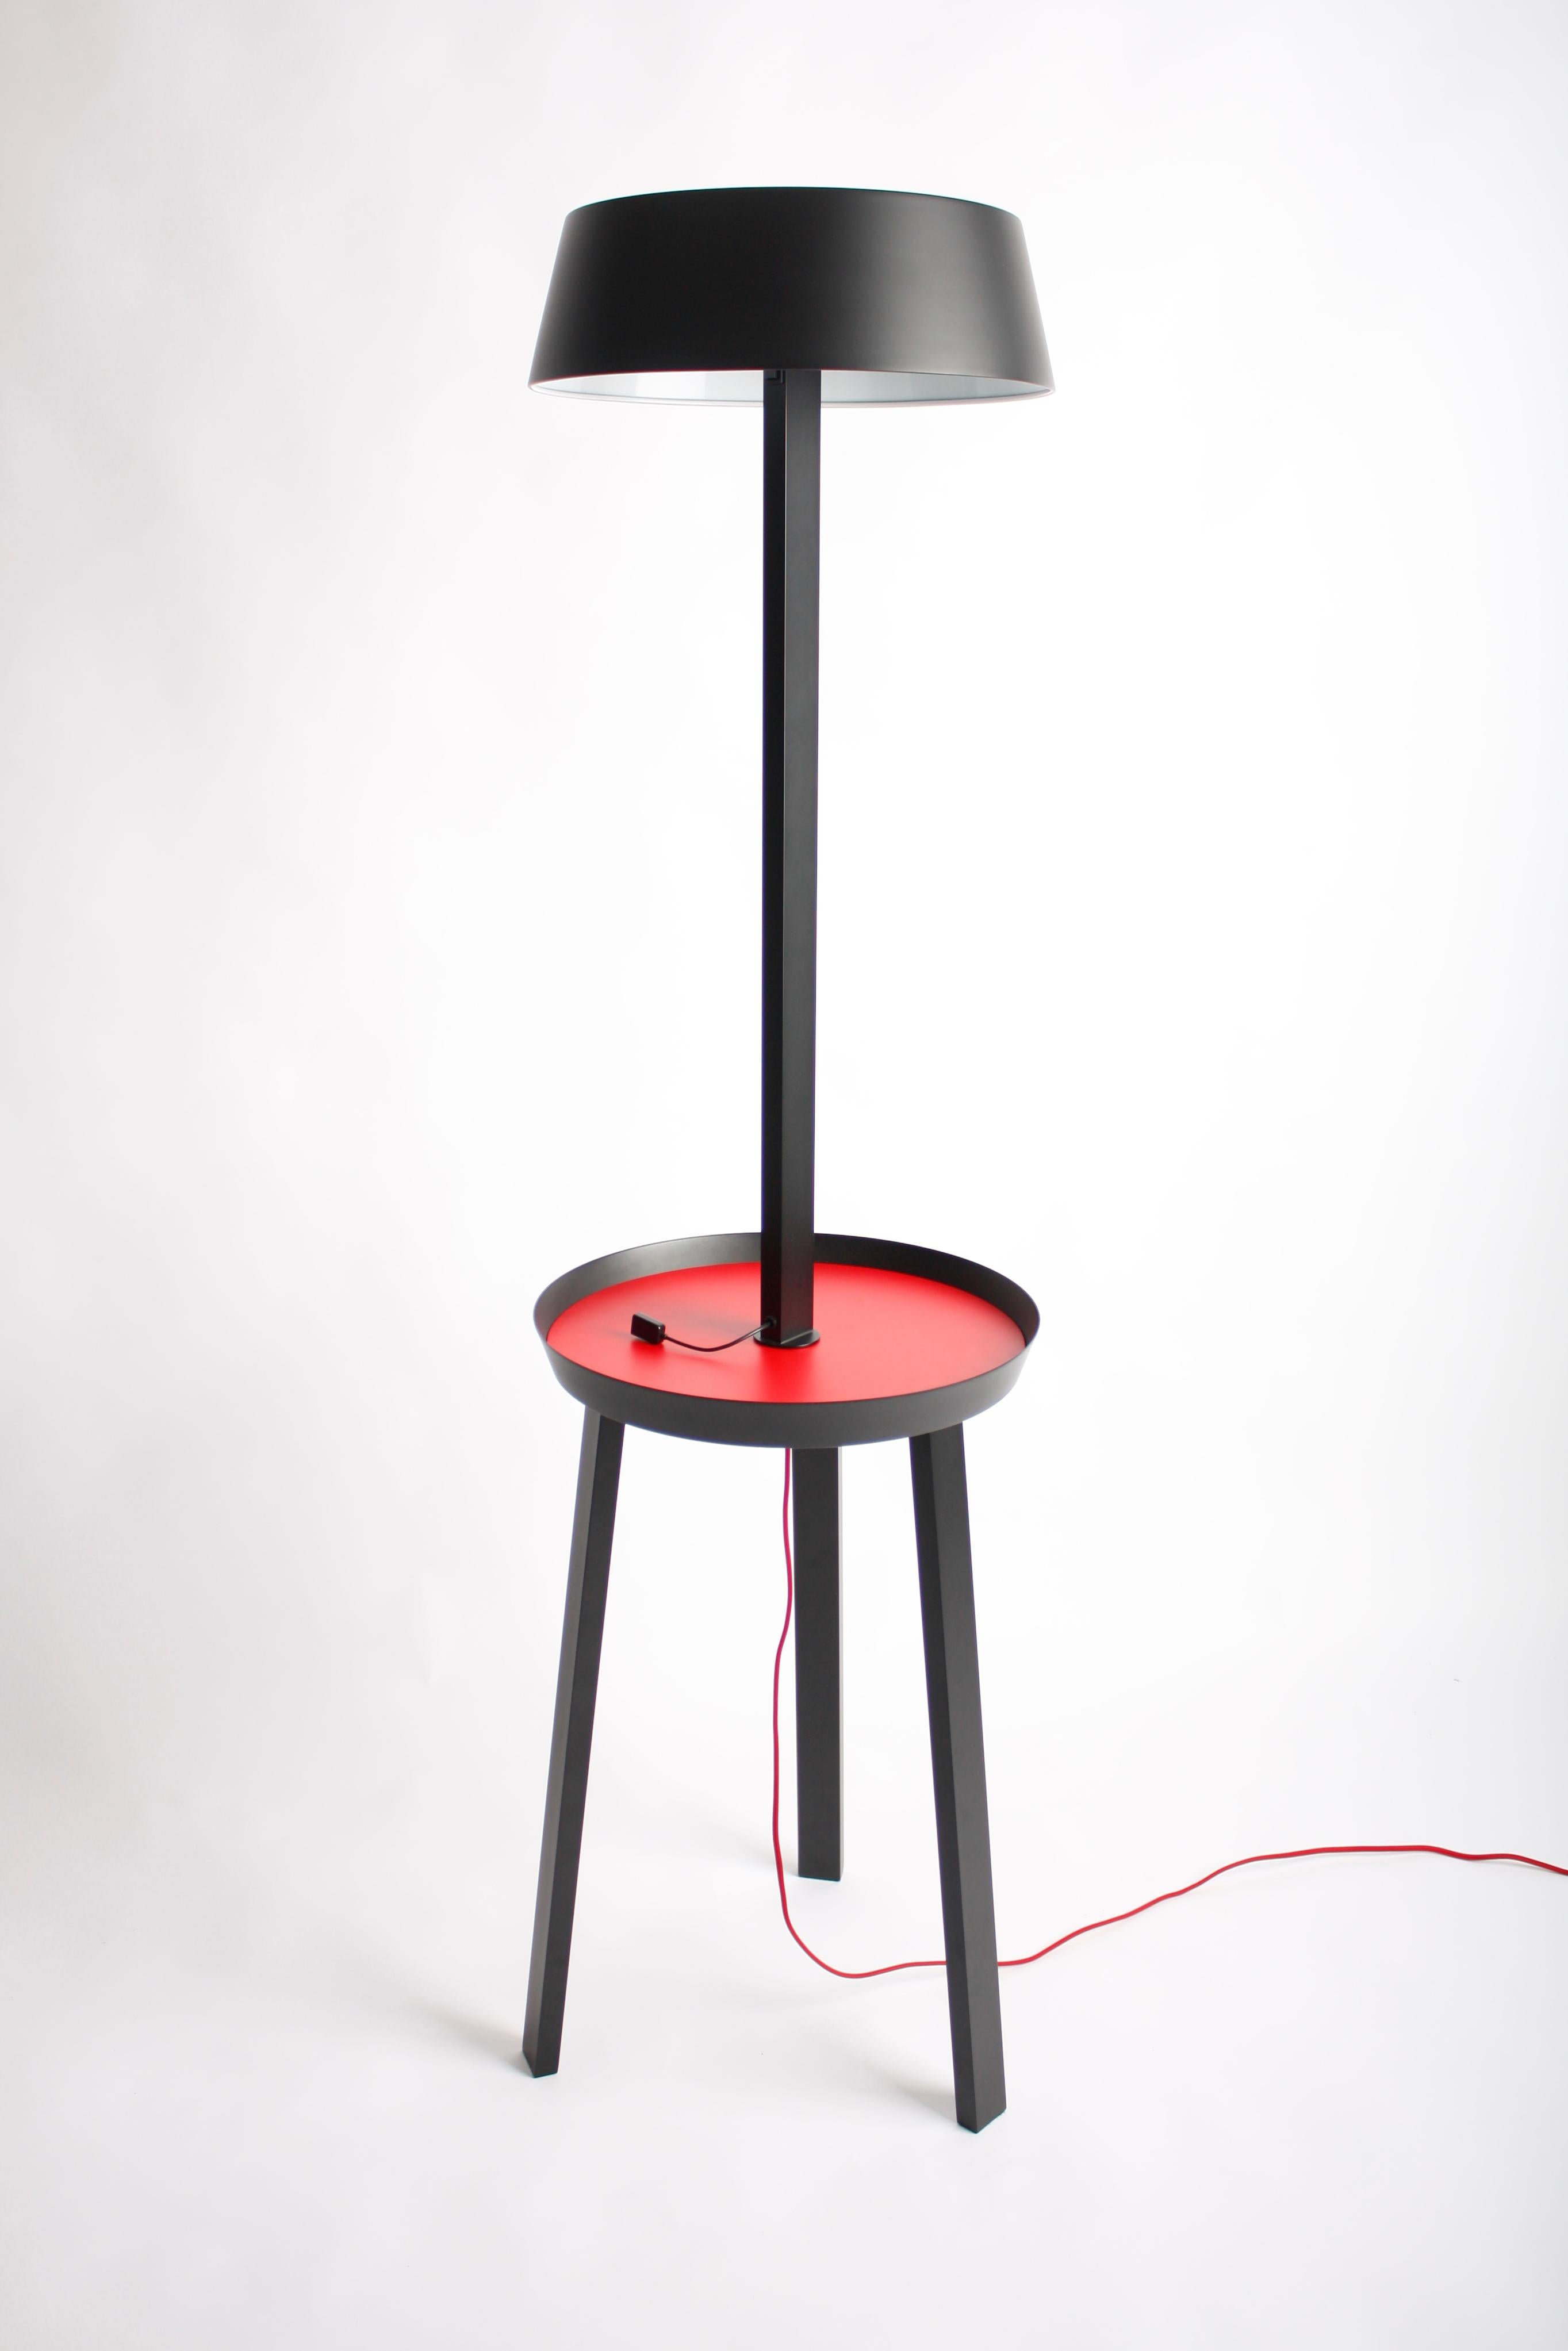 Carry Floor Lamp In New Condition For Sale In Renton, WA